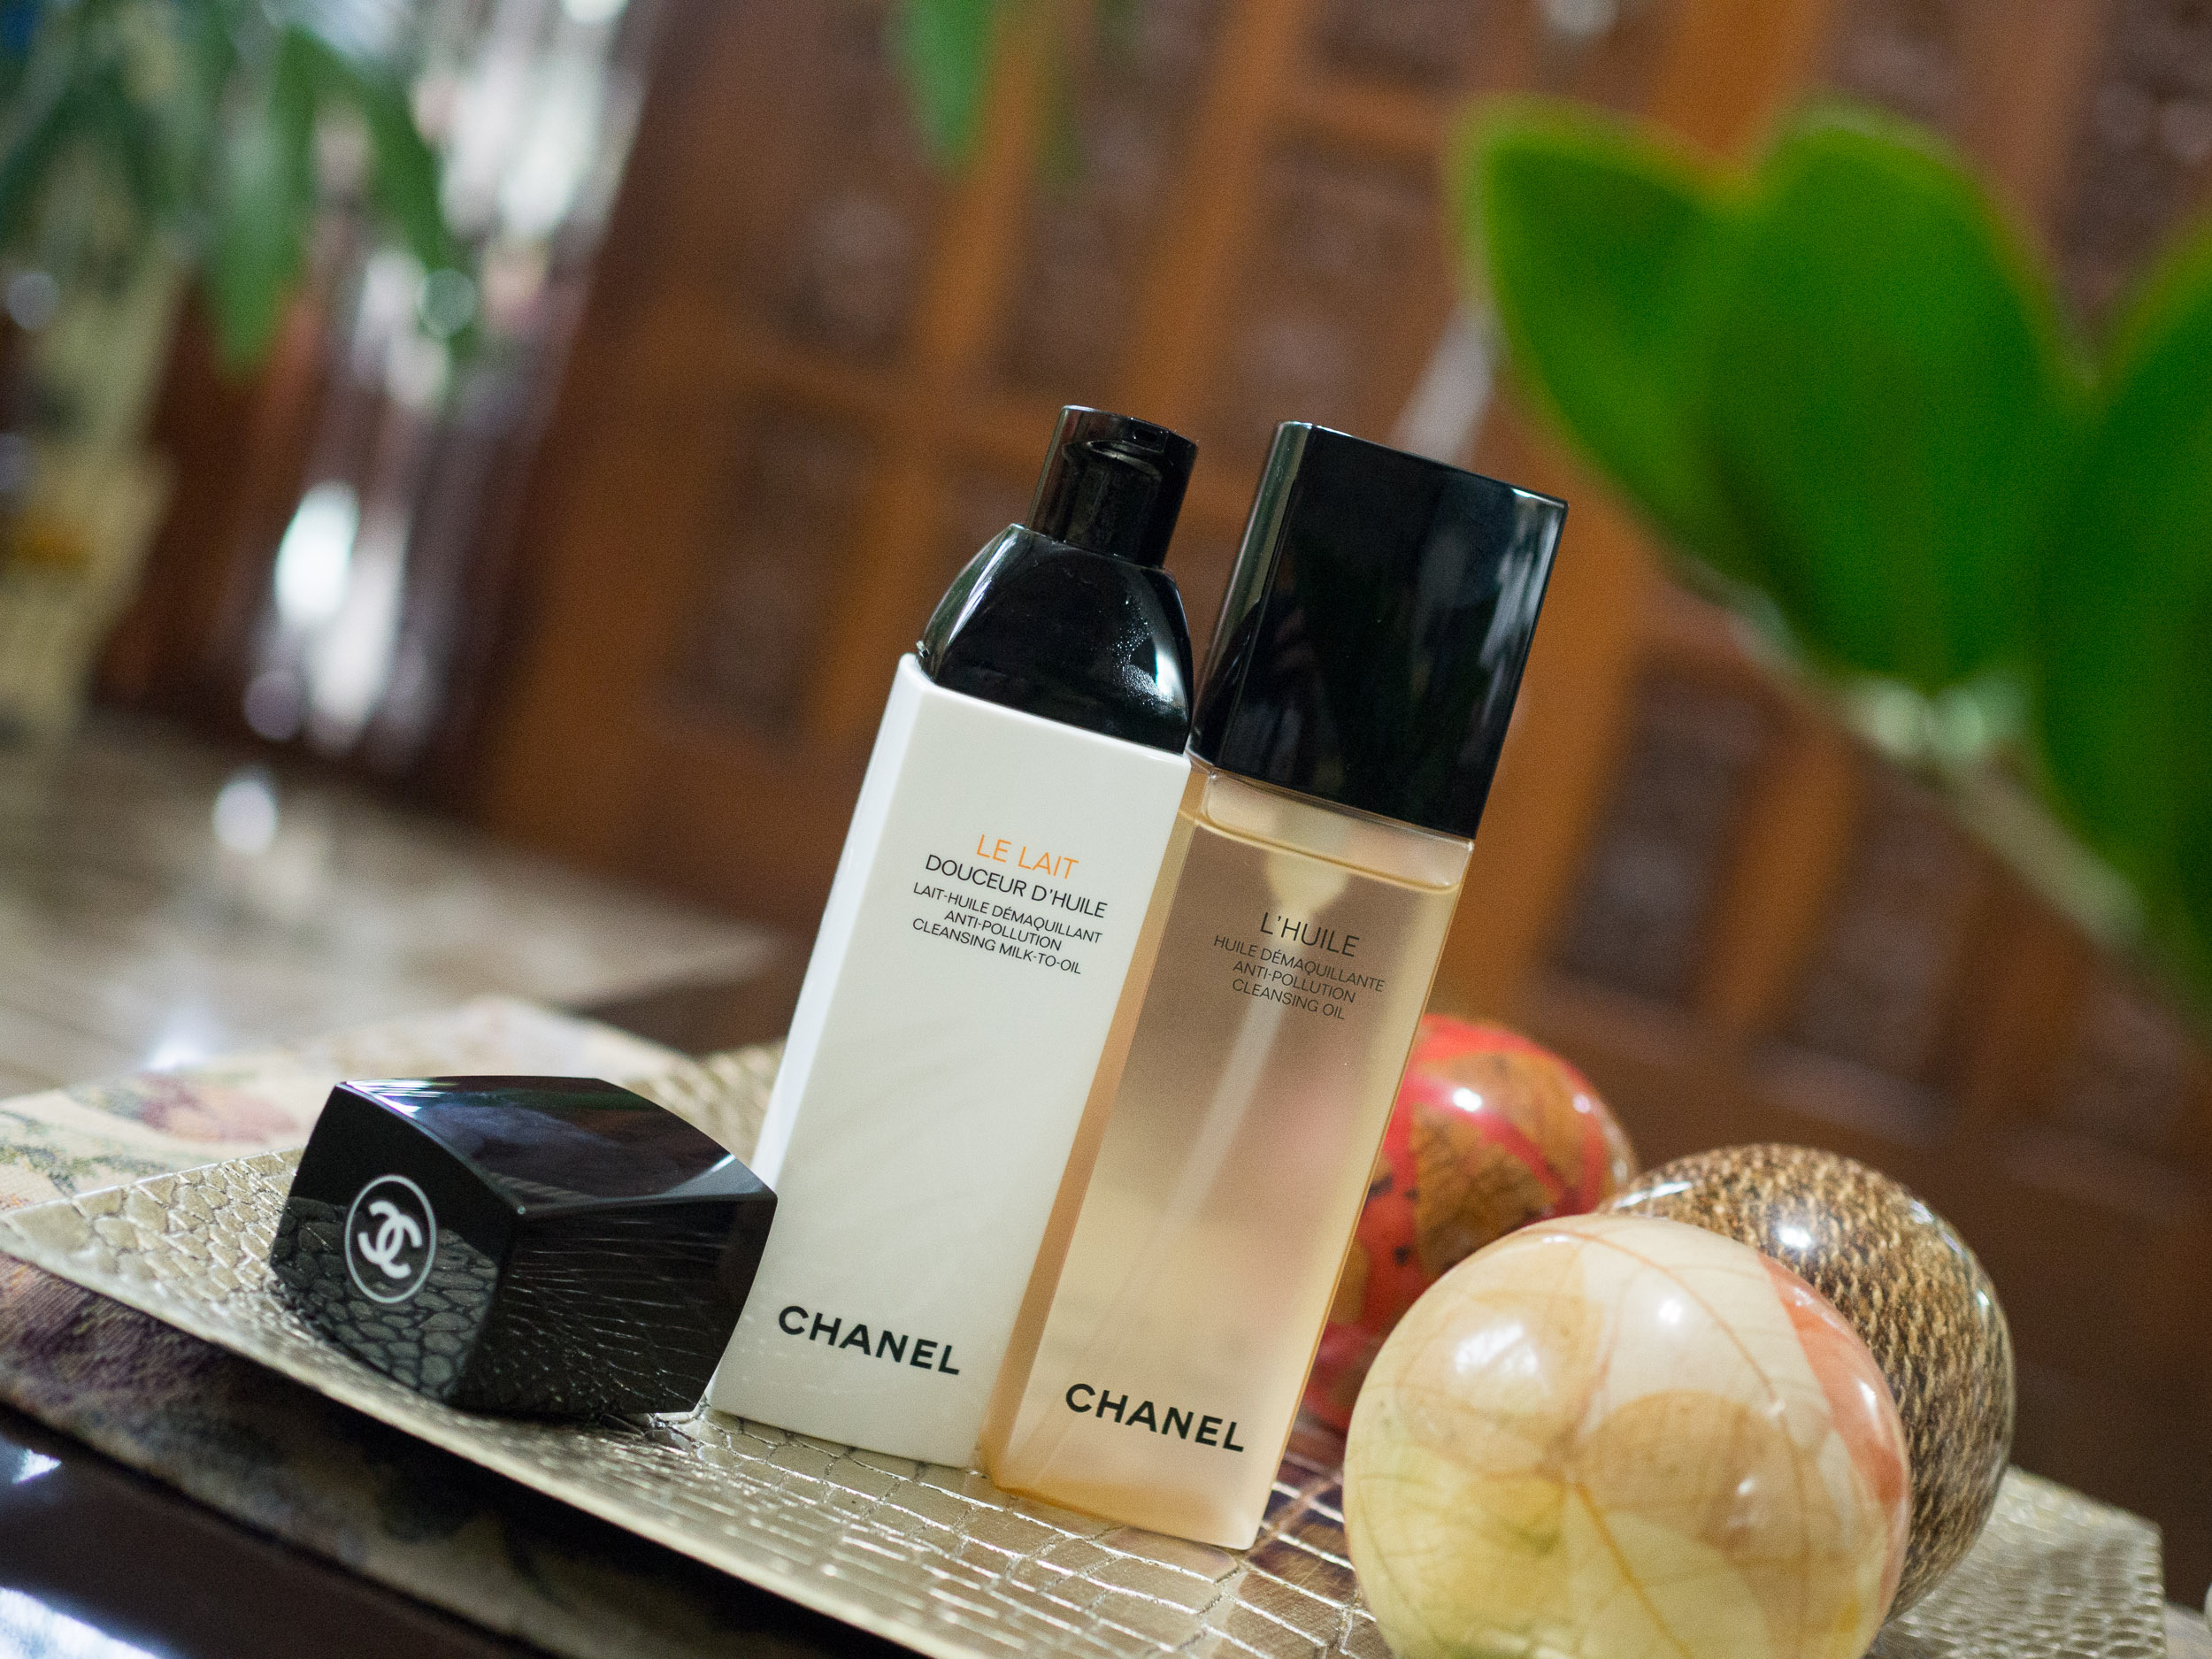 Chanel L'Huile Anti-Pollution Cleansing Oil and Le Lait Anti-Pollution  Cleansing Milk-to-Oil + Review | Lush Angel